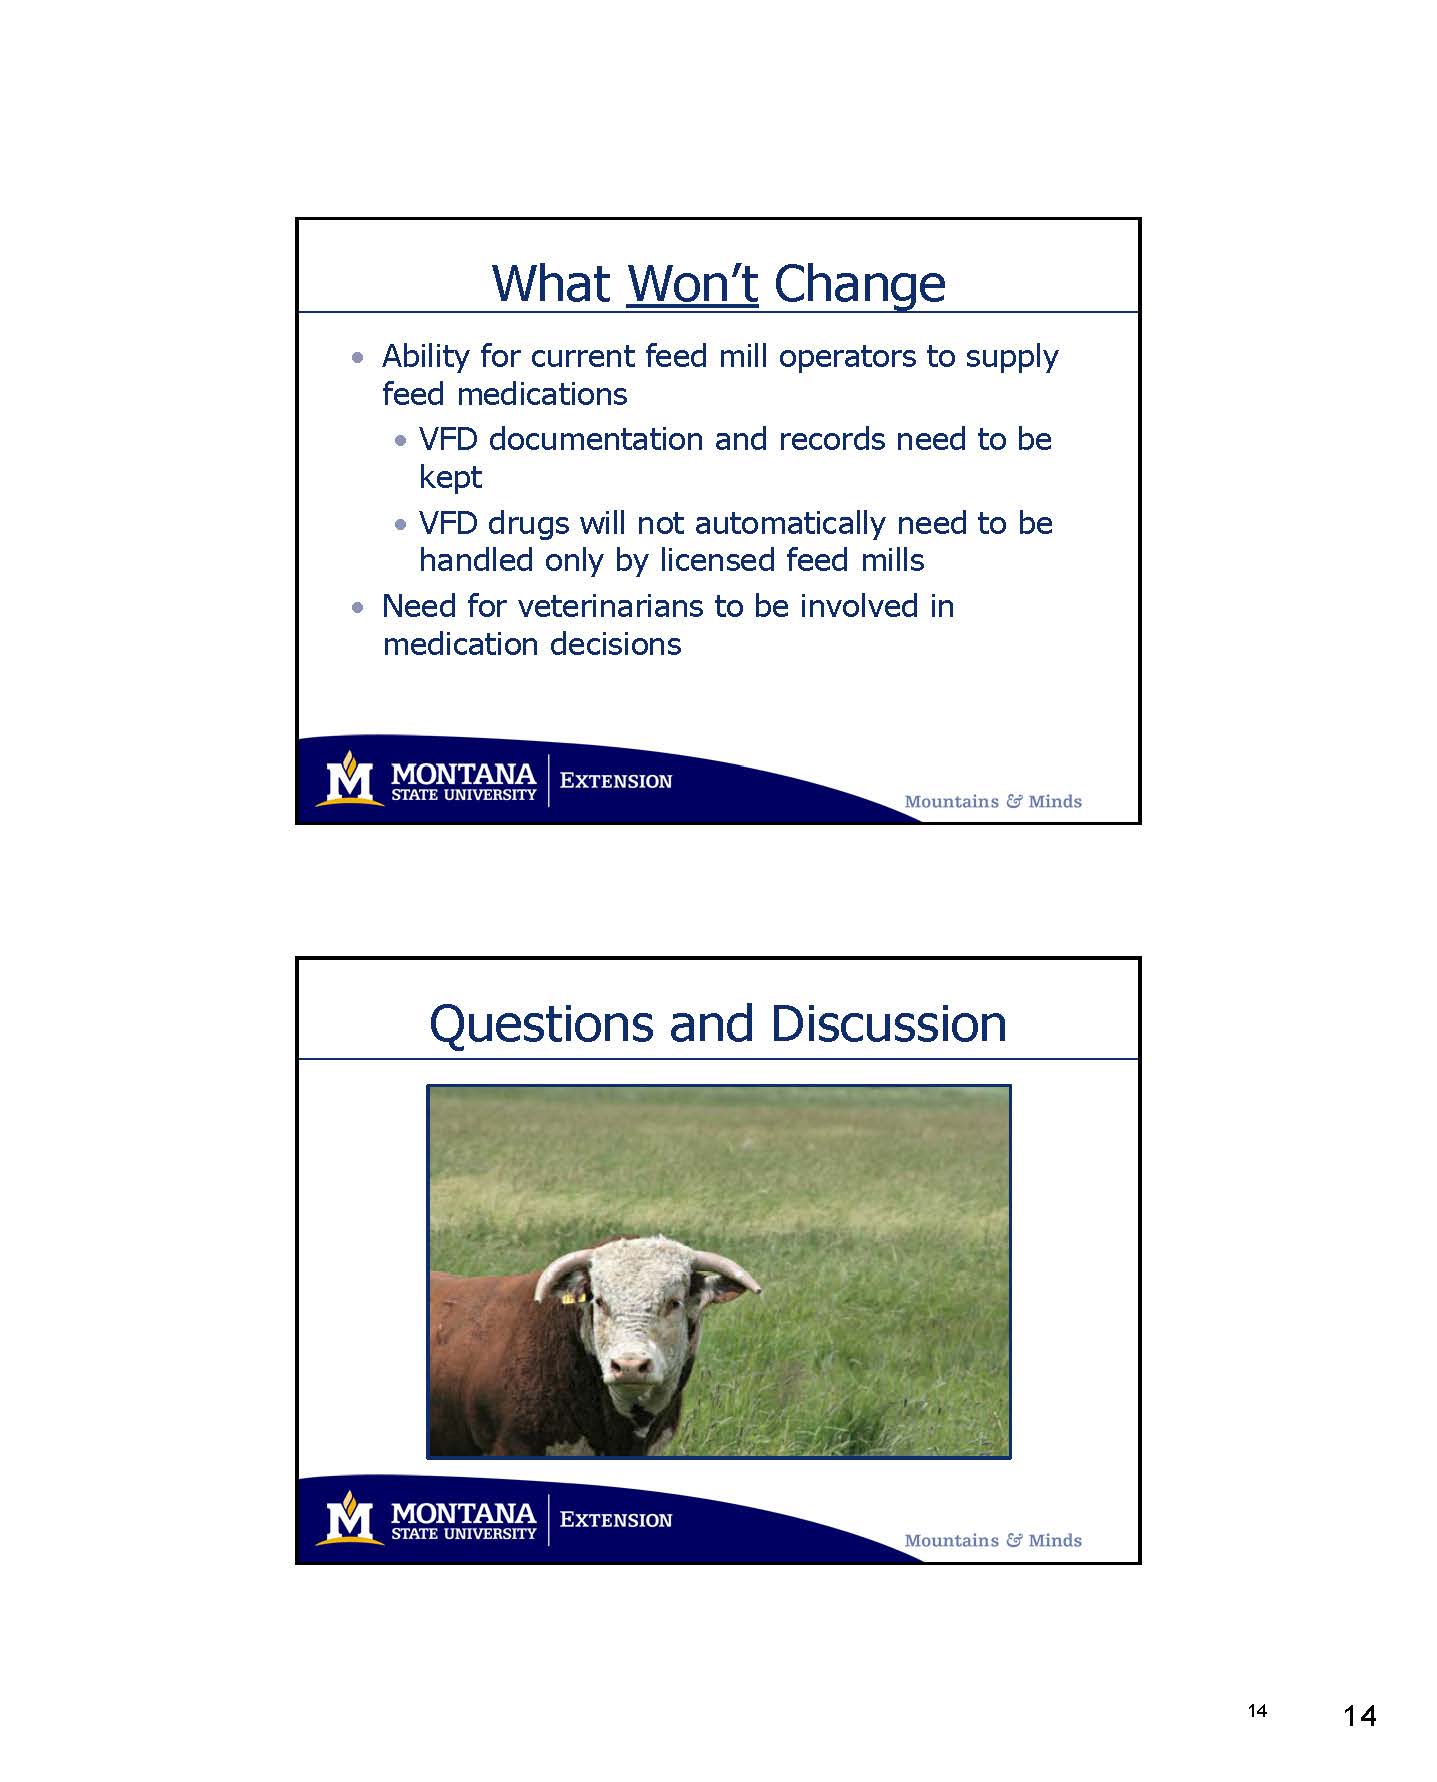 Slides showing basic information about the veterinary feed directive and the changes in the use of feed grade antibiotics for livestock.